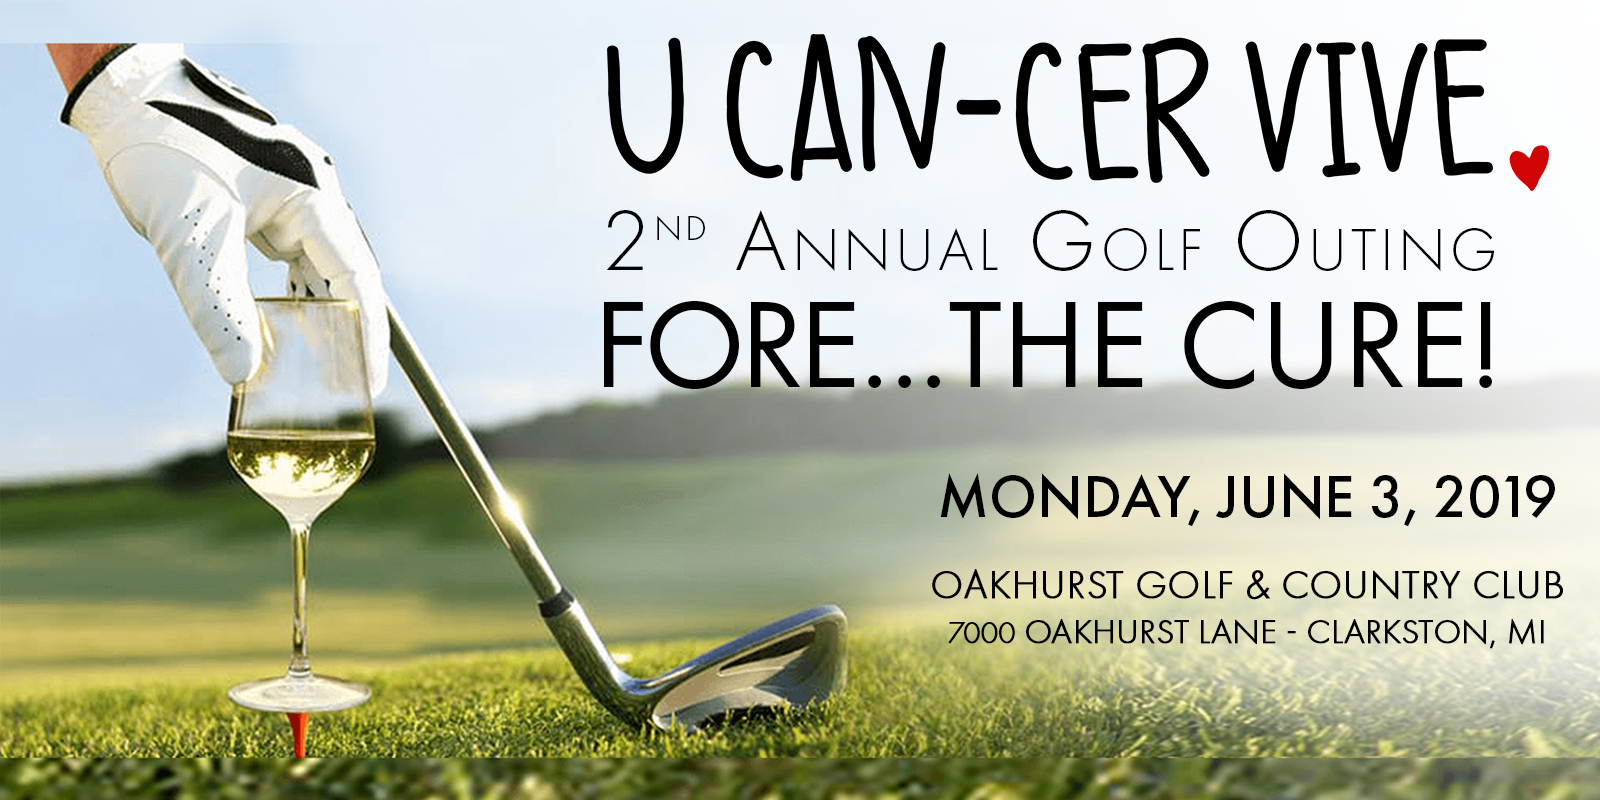 U CAN-CER VIVE Golf Outing Fore...The Cure!